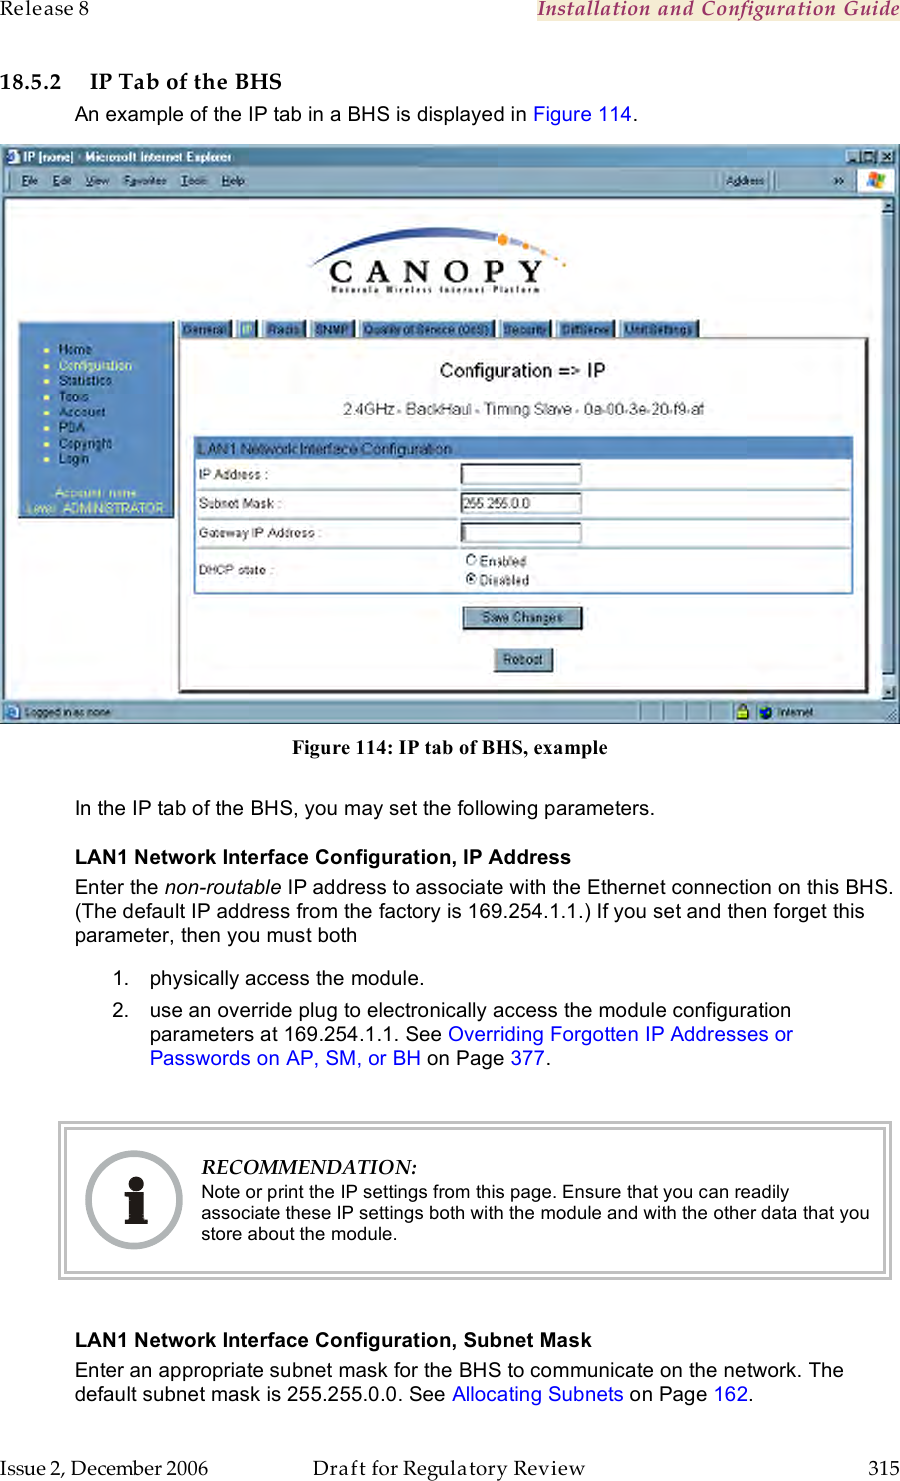 Release 8    Installation and Configuration Guide   Issue 2, December 2006  Draft for Regulatory Review  315     18.5.2 IP Tab of the BHS An example of the IP tab in a BHS is displayed in Figure 114.  Figure 114: IP tab of BHS, example  In the IP tab of the BHS, you may set the following parameters. LAN1 Network Interface Configuration, IP Address Enter the non-routable IP address to associate with the Ethernet connection on this BHS. (The default IP address from the factory is 169.254.1.1.) If you set and then forget this parameter, then you must both 1.  physically access the module. 2.  use an override plug to electronically access the module configuration parameters at 169.254.1.1. See Overriding Forgotten IP Addresses or Passwords on AP, SM, or BH on Page 377.   RECOMMENDATION: Note or print the IP settings from this page. Ensure that you can readily associate these IP settings both with the module and with the other data that you store about the module.  LAN1 Network Interface Configuration, Subnet Mask Enter an appropriate subnet mask for the BHS to communicate on the network. The default subnet mask is 255.255.0.0. See Allocating Subnets on Page 162. 